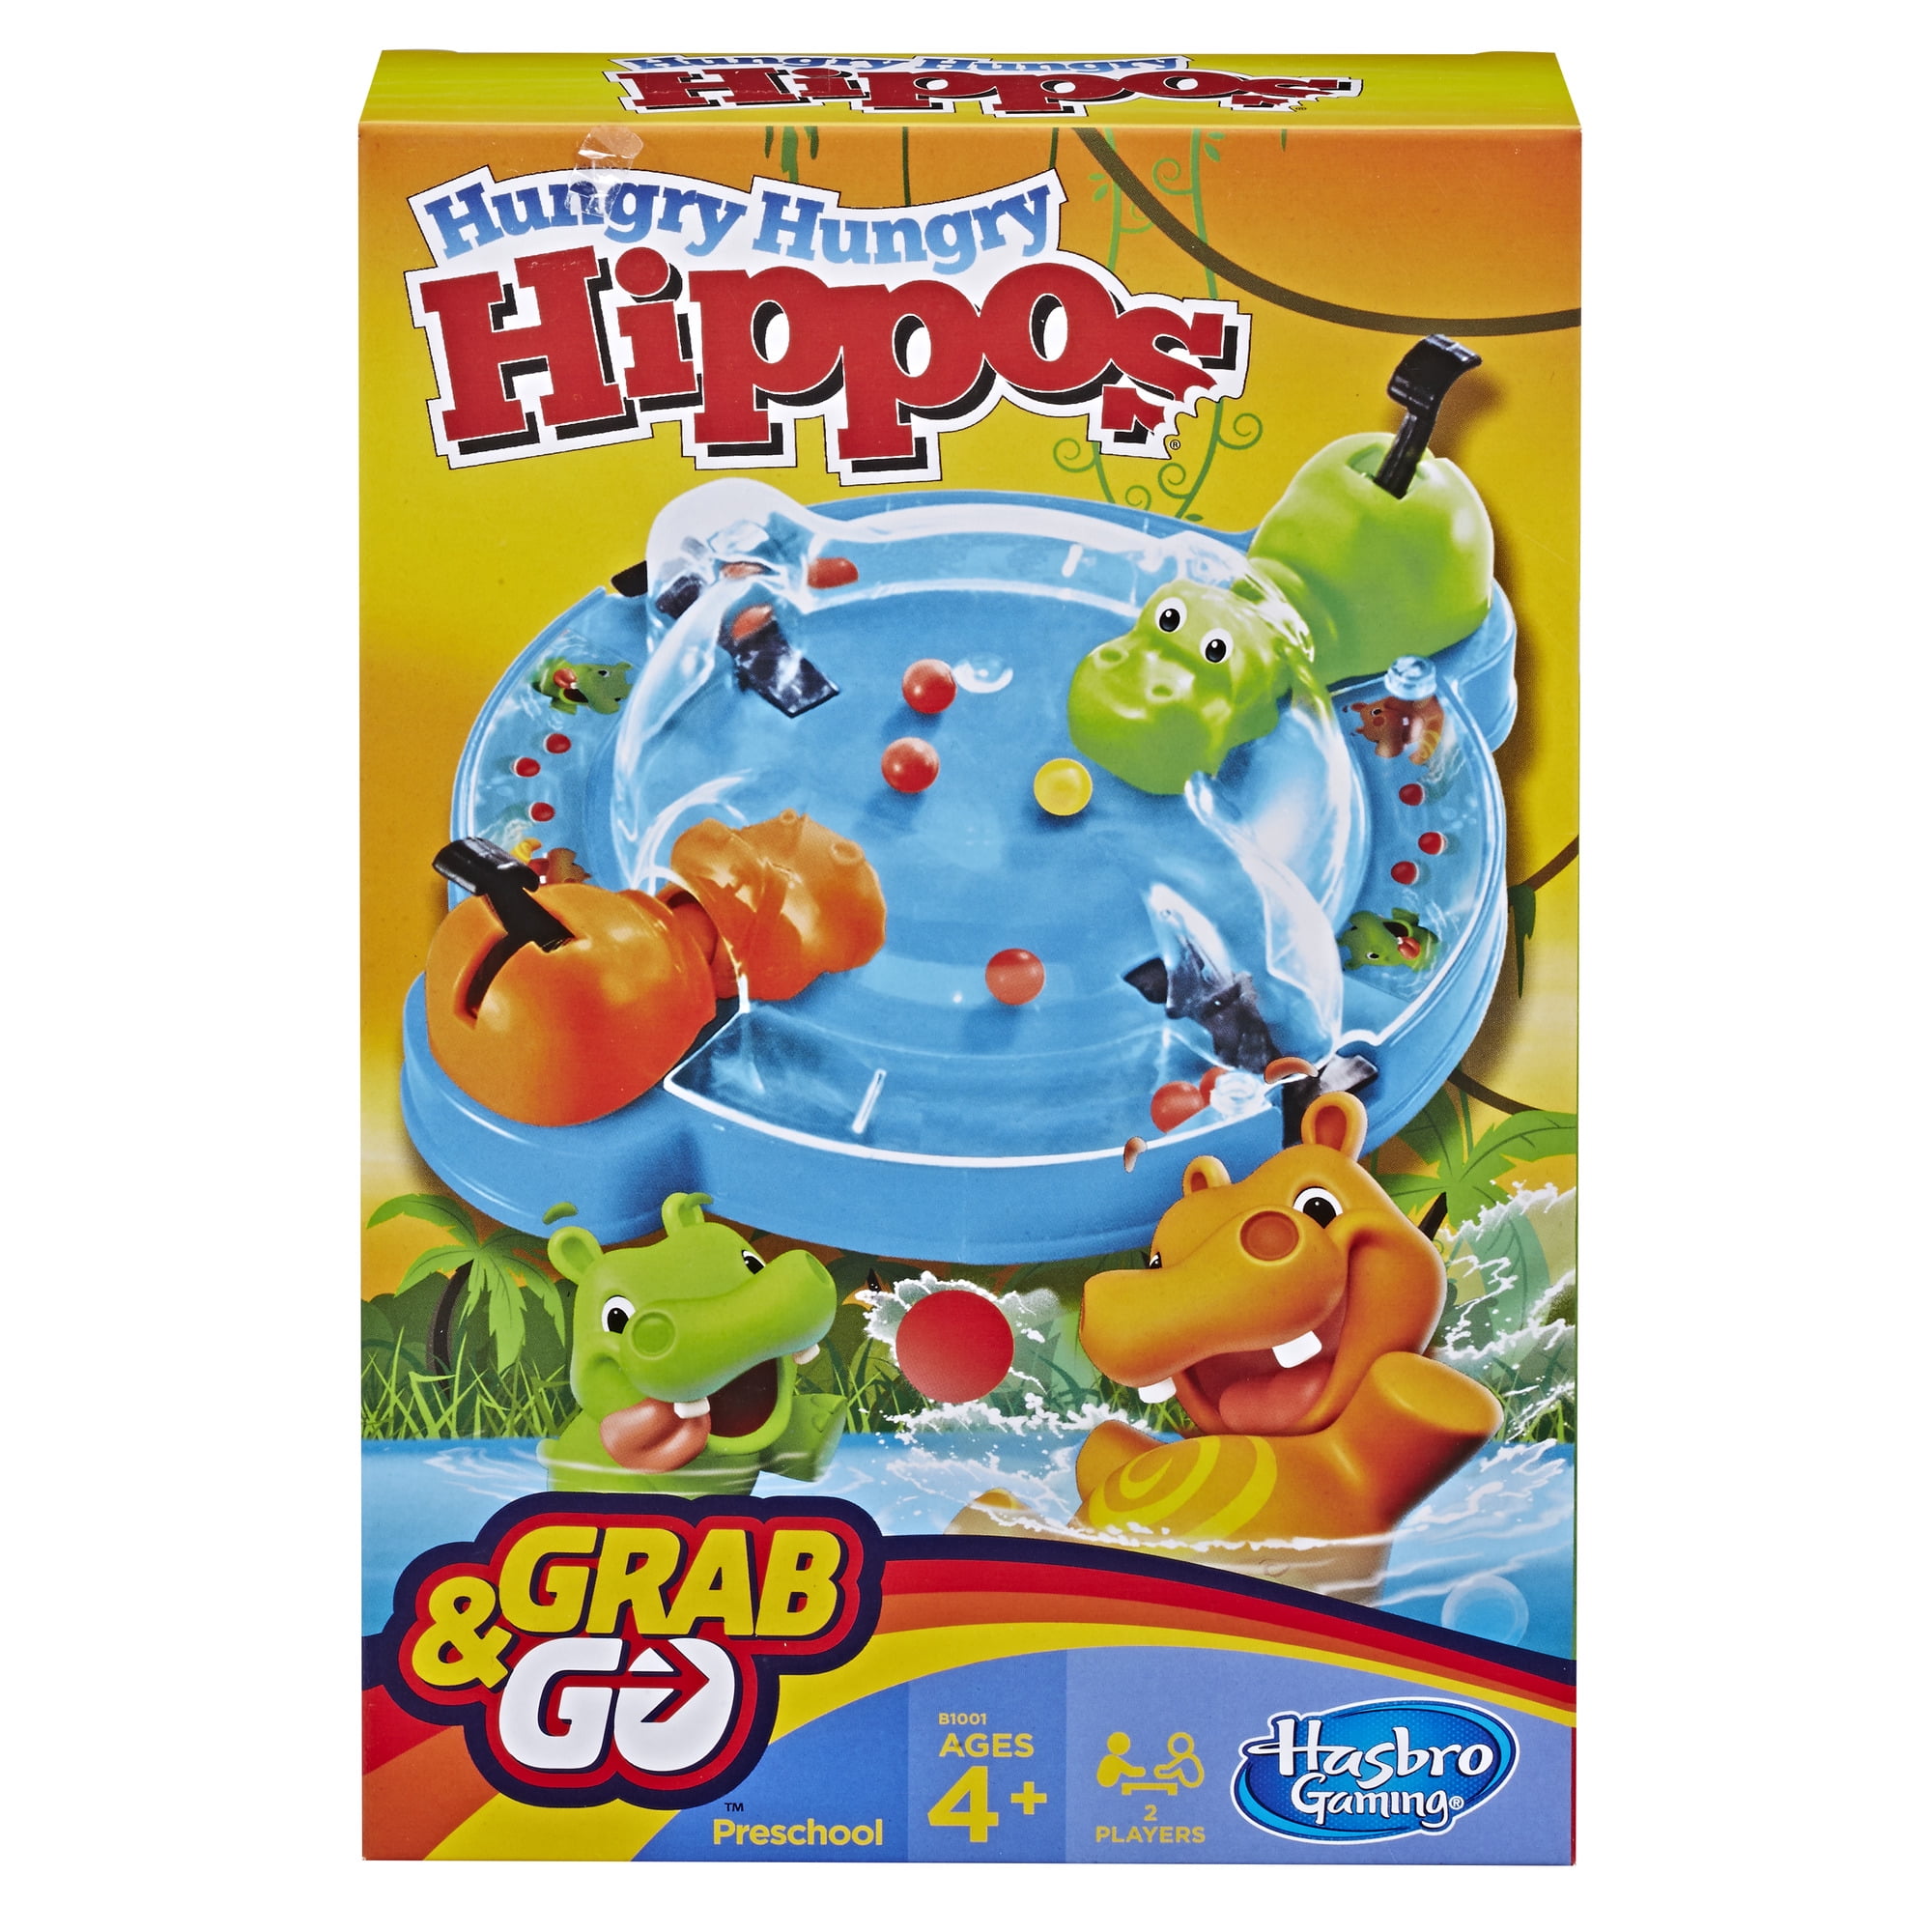 Hungry Hungry Hippos Grab and Go Travel Size Game NEW